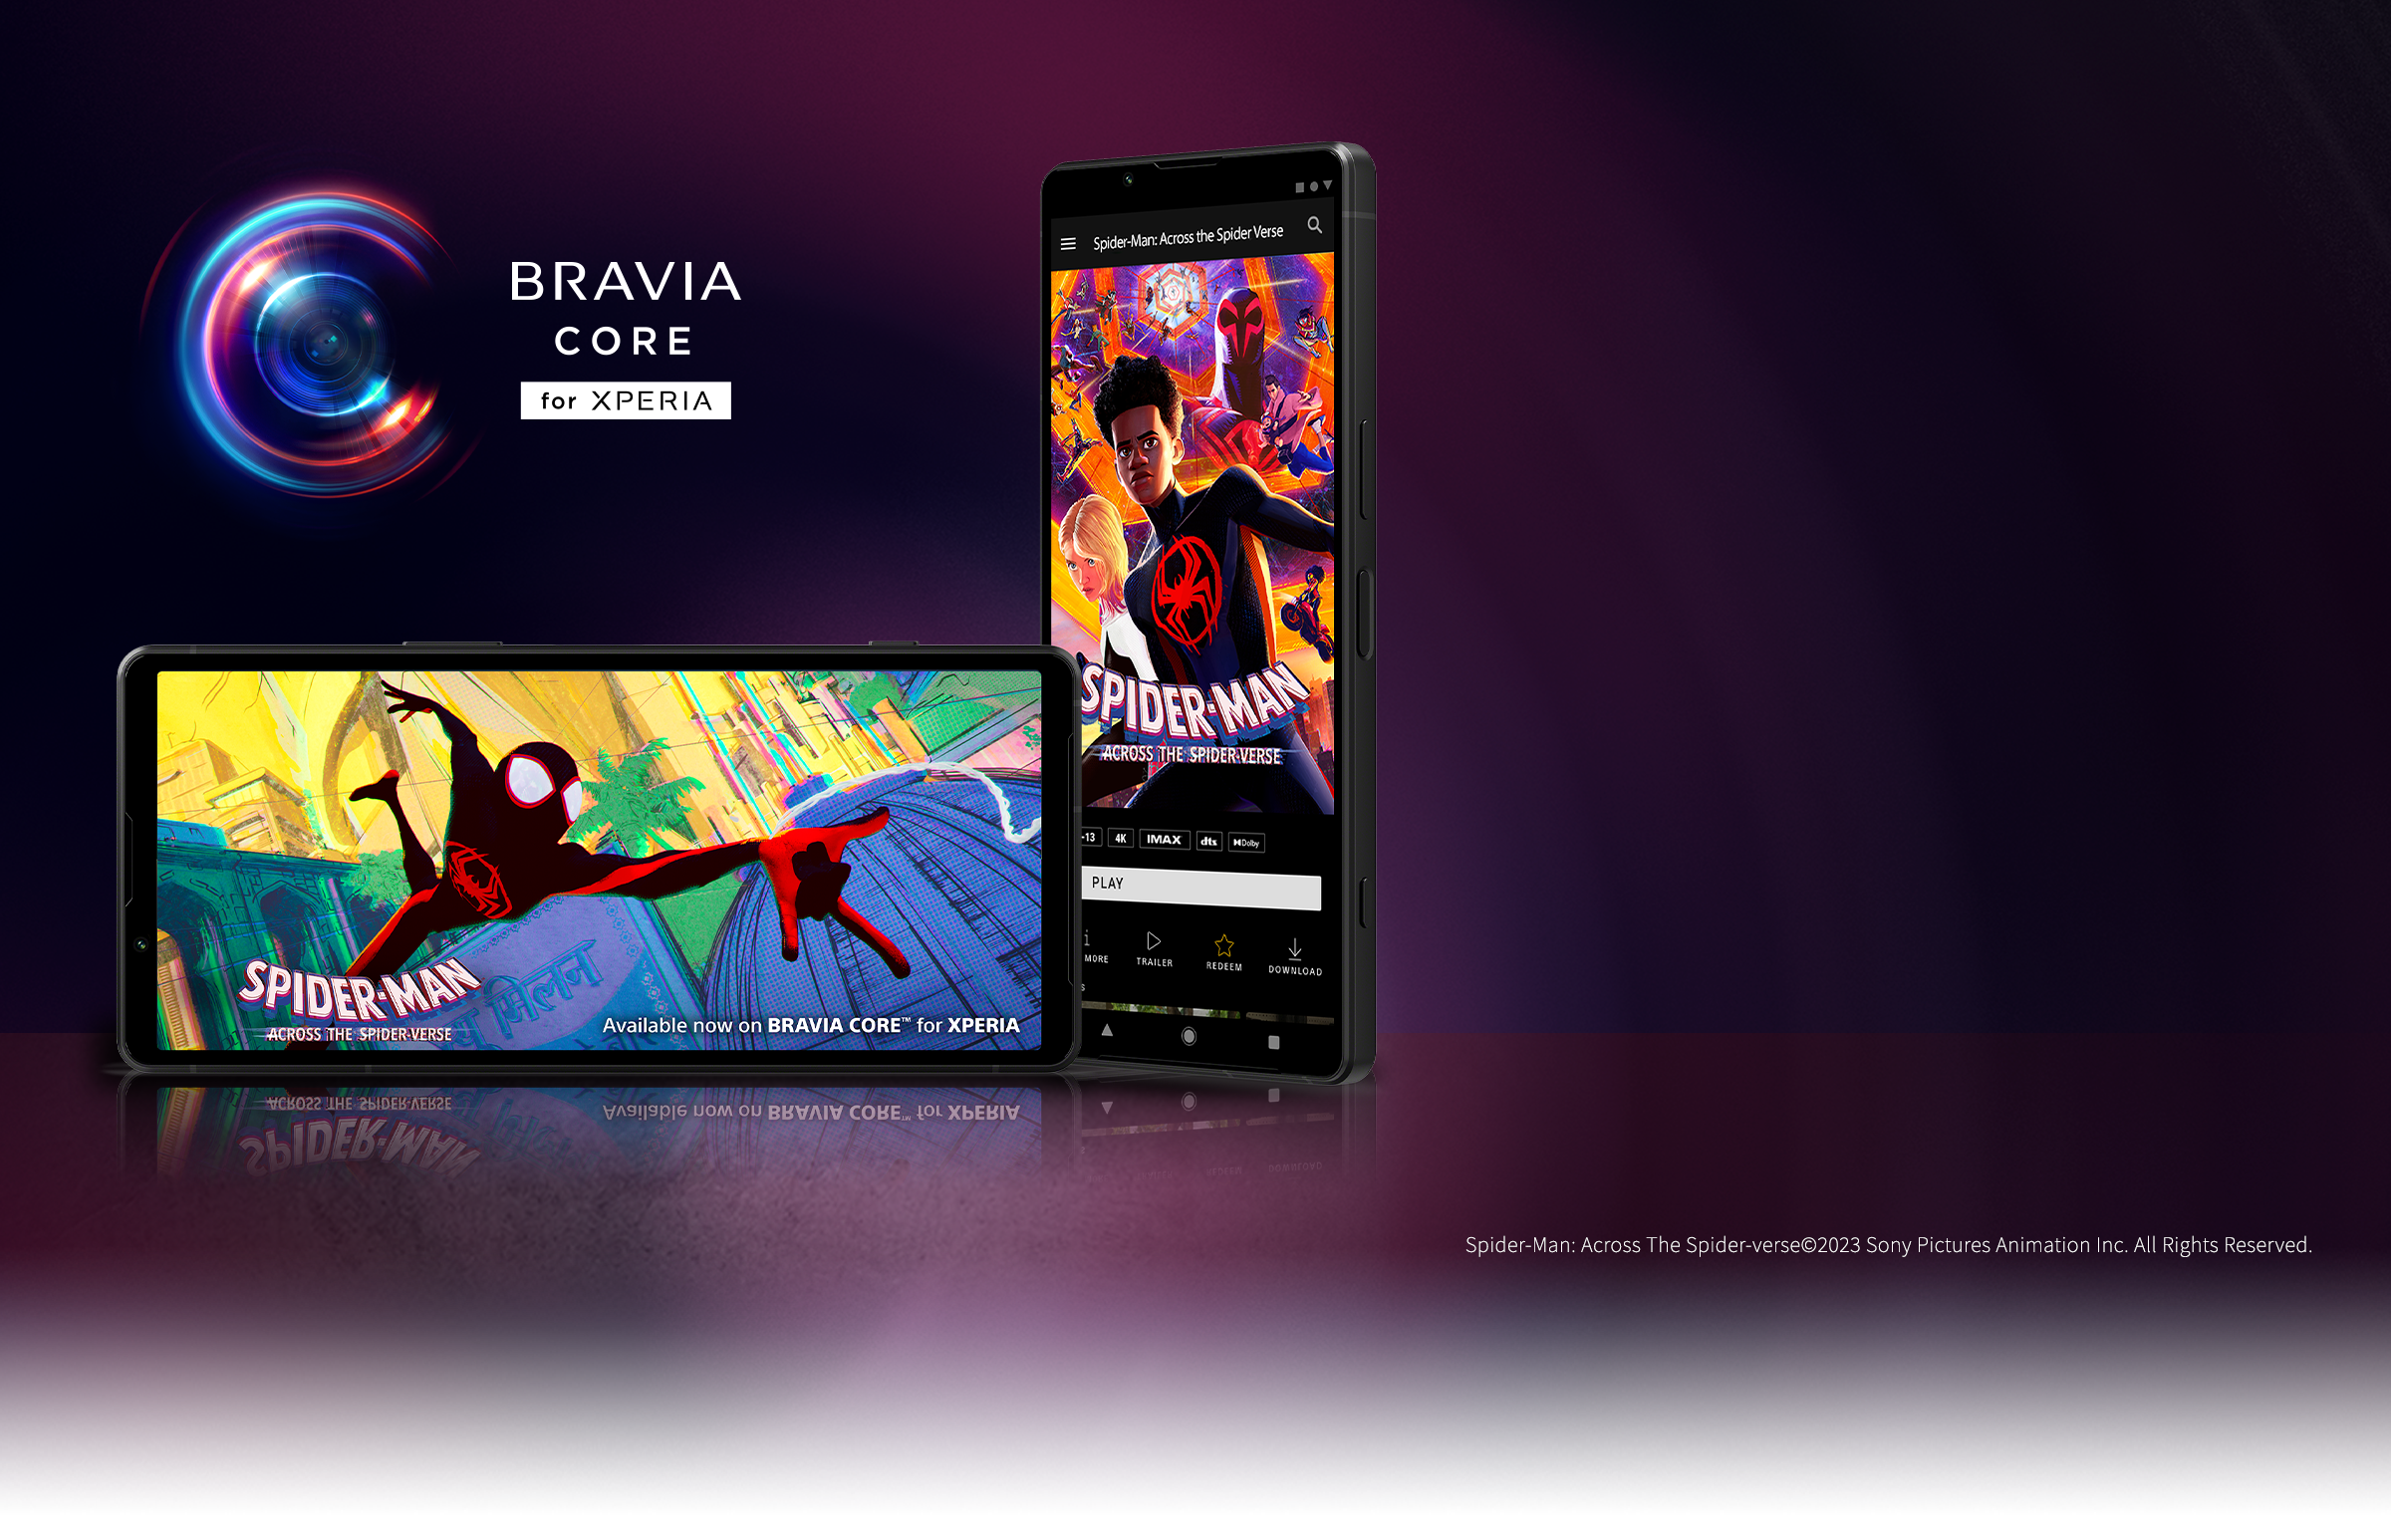 BRAIA CORE for Xperia WHITNEY HOUSTON: I WANNA DANCE WITH SOMEBODY Available now on BRAVIA CORE ™ for Xperia ©2022 CTMG. MARVEL and all related character names: © & ™ 2022 MARVEL.